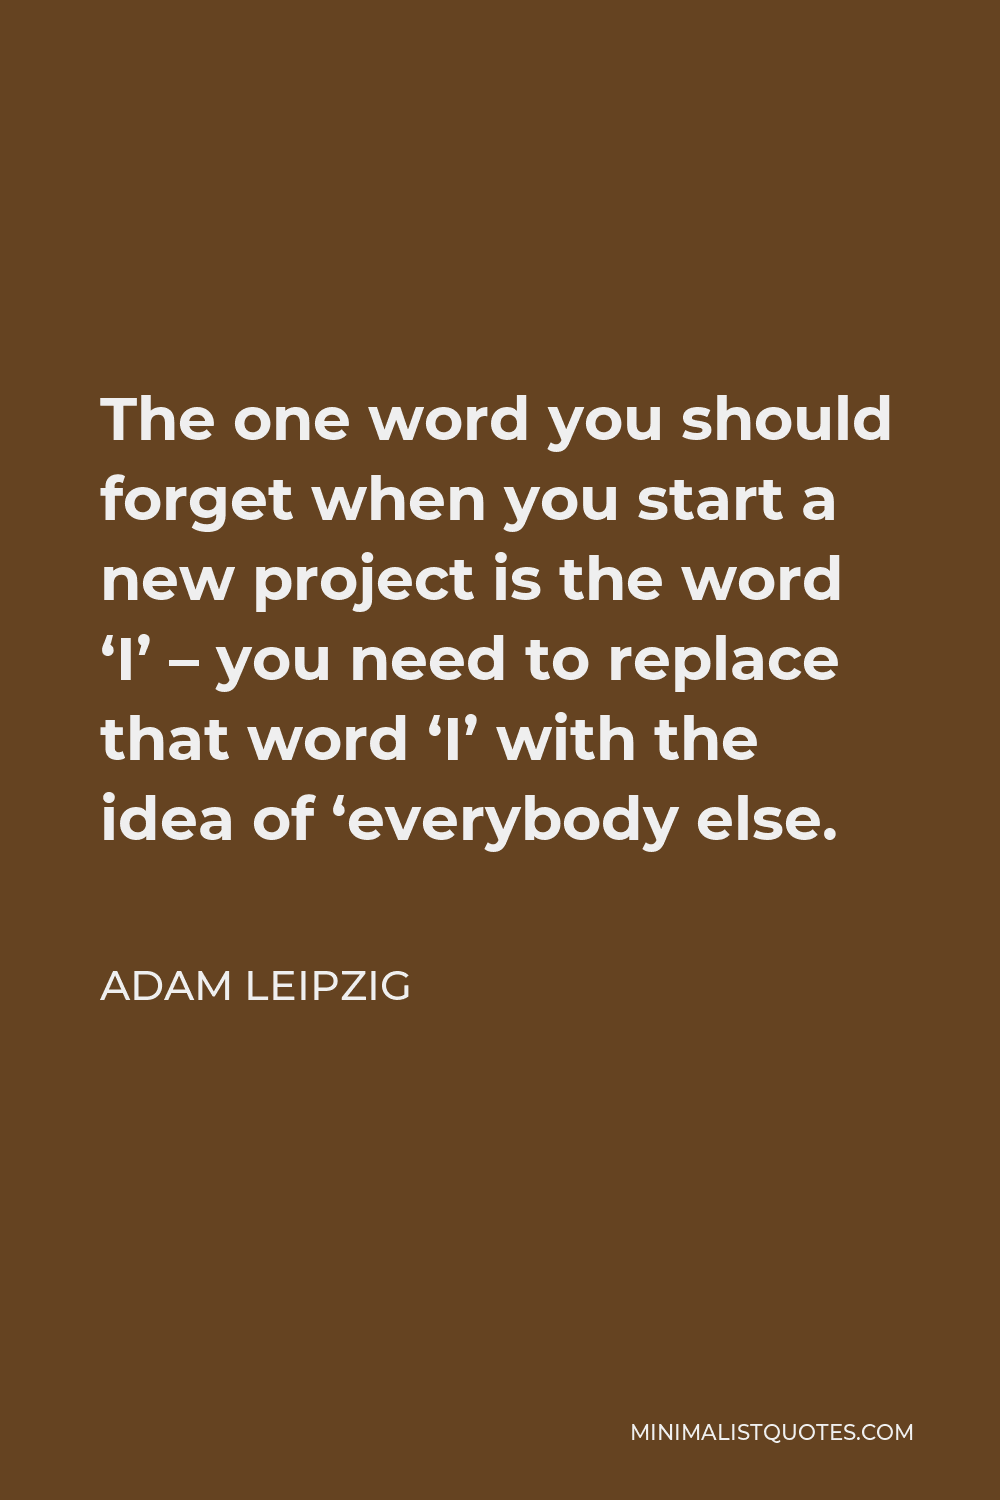 Adam Leipzig Quote - The one word you should forget when you start a new project is the word ‘I’ – you need to replace that word ‘I’ with the idea of ‘everybody else.